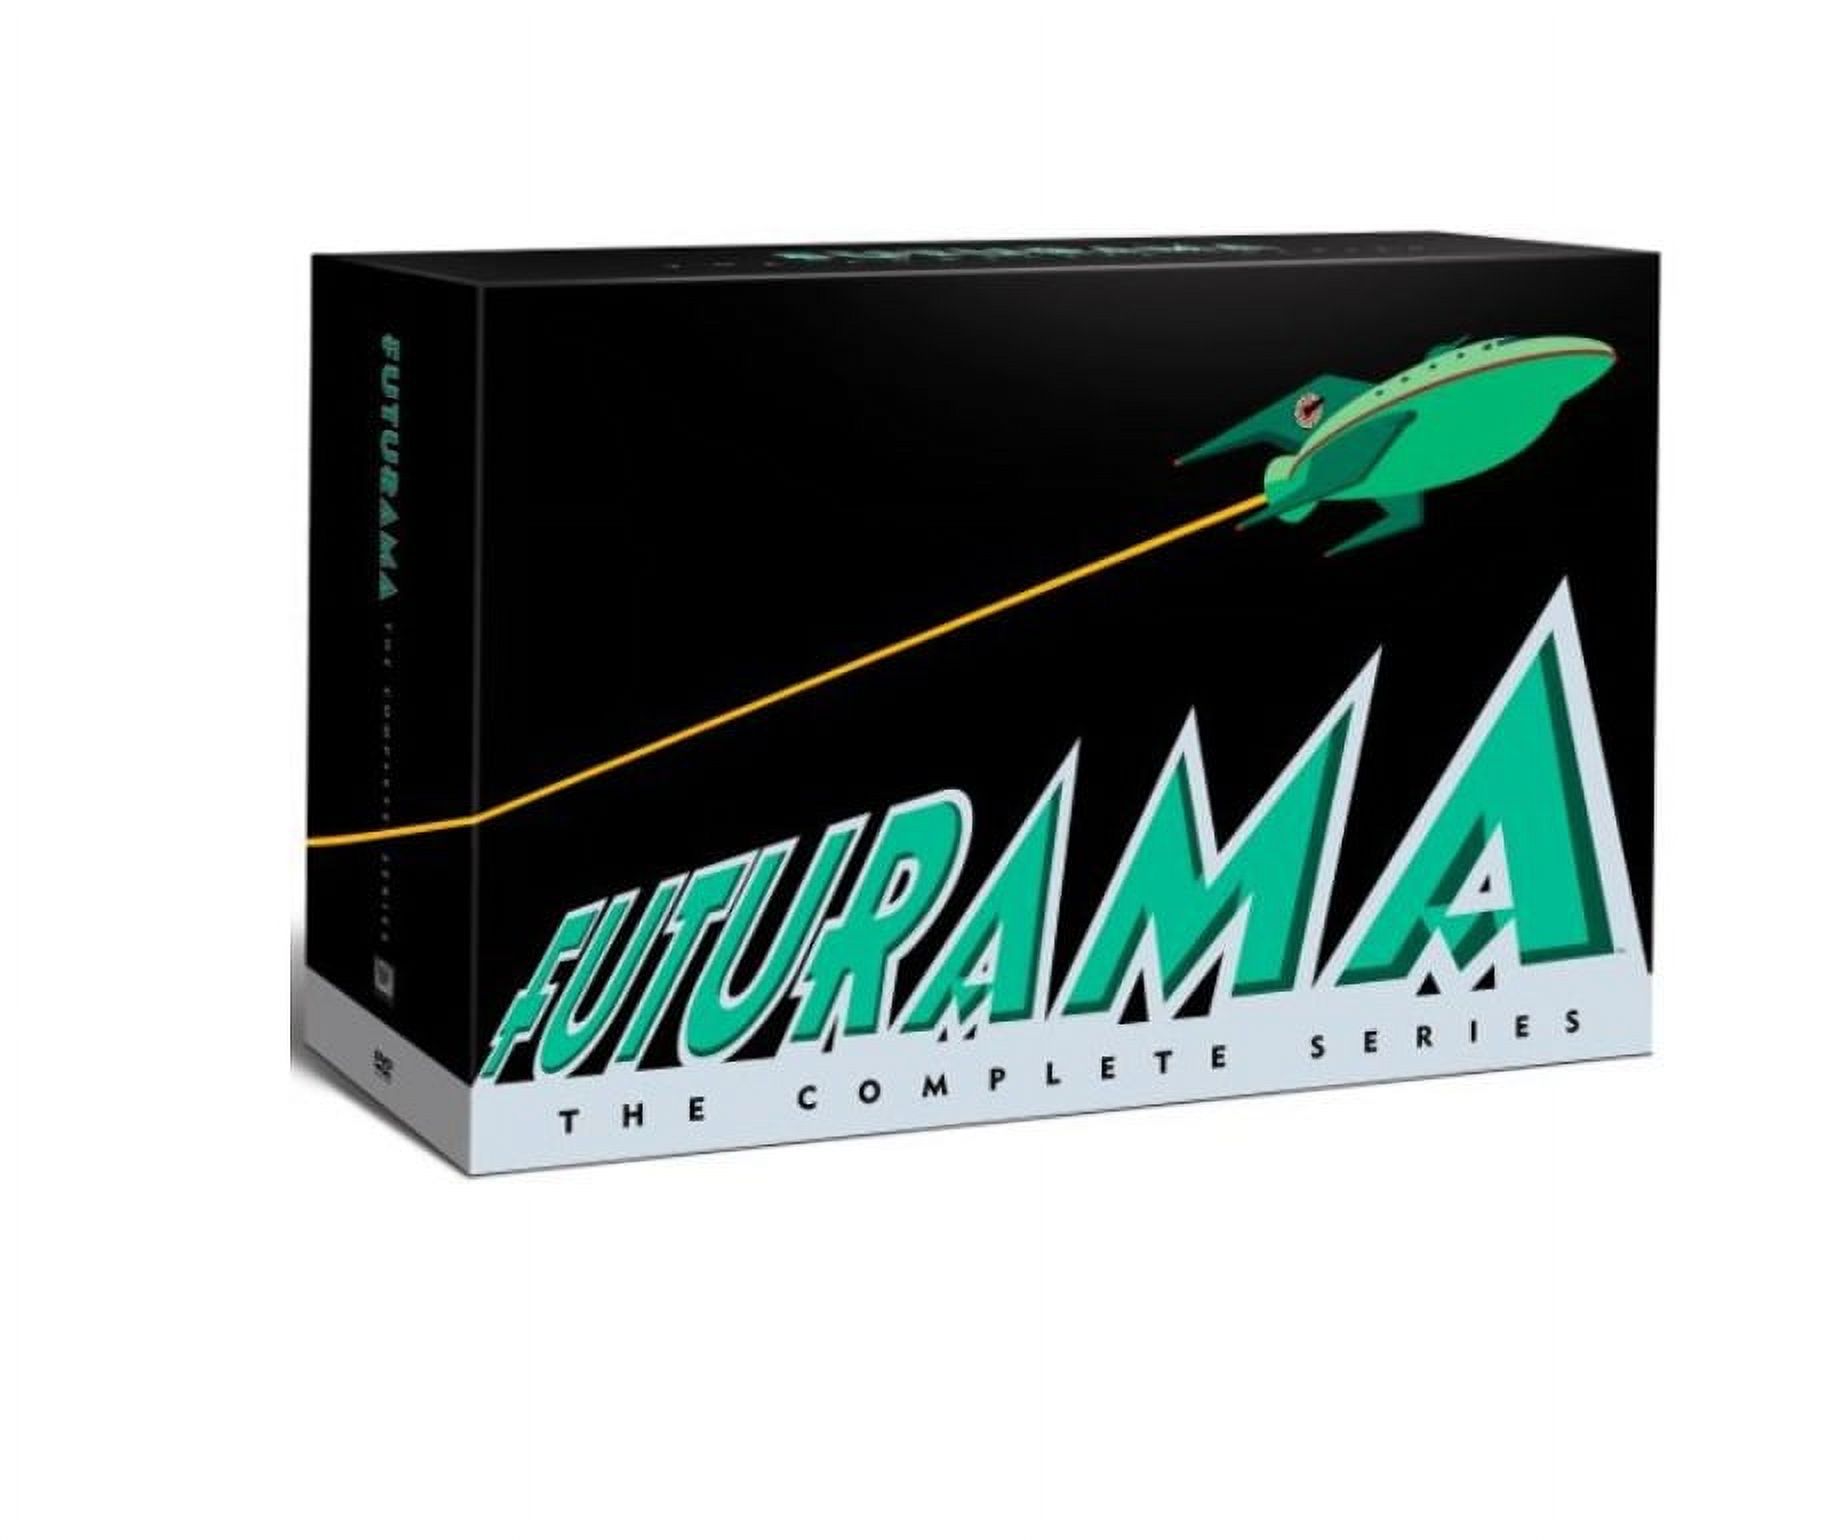 Futurama: The Complete Series (DVD) - image 1 of 2